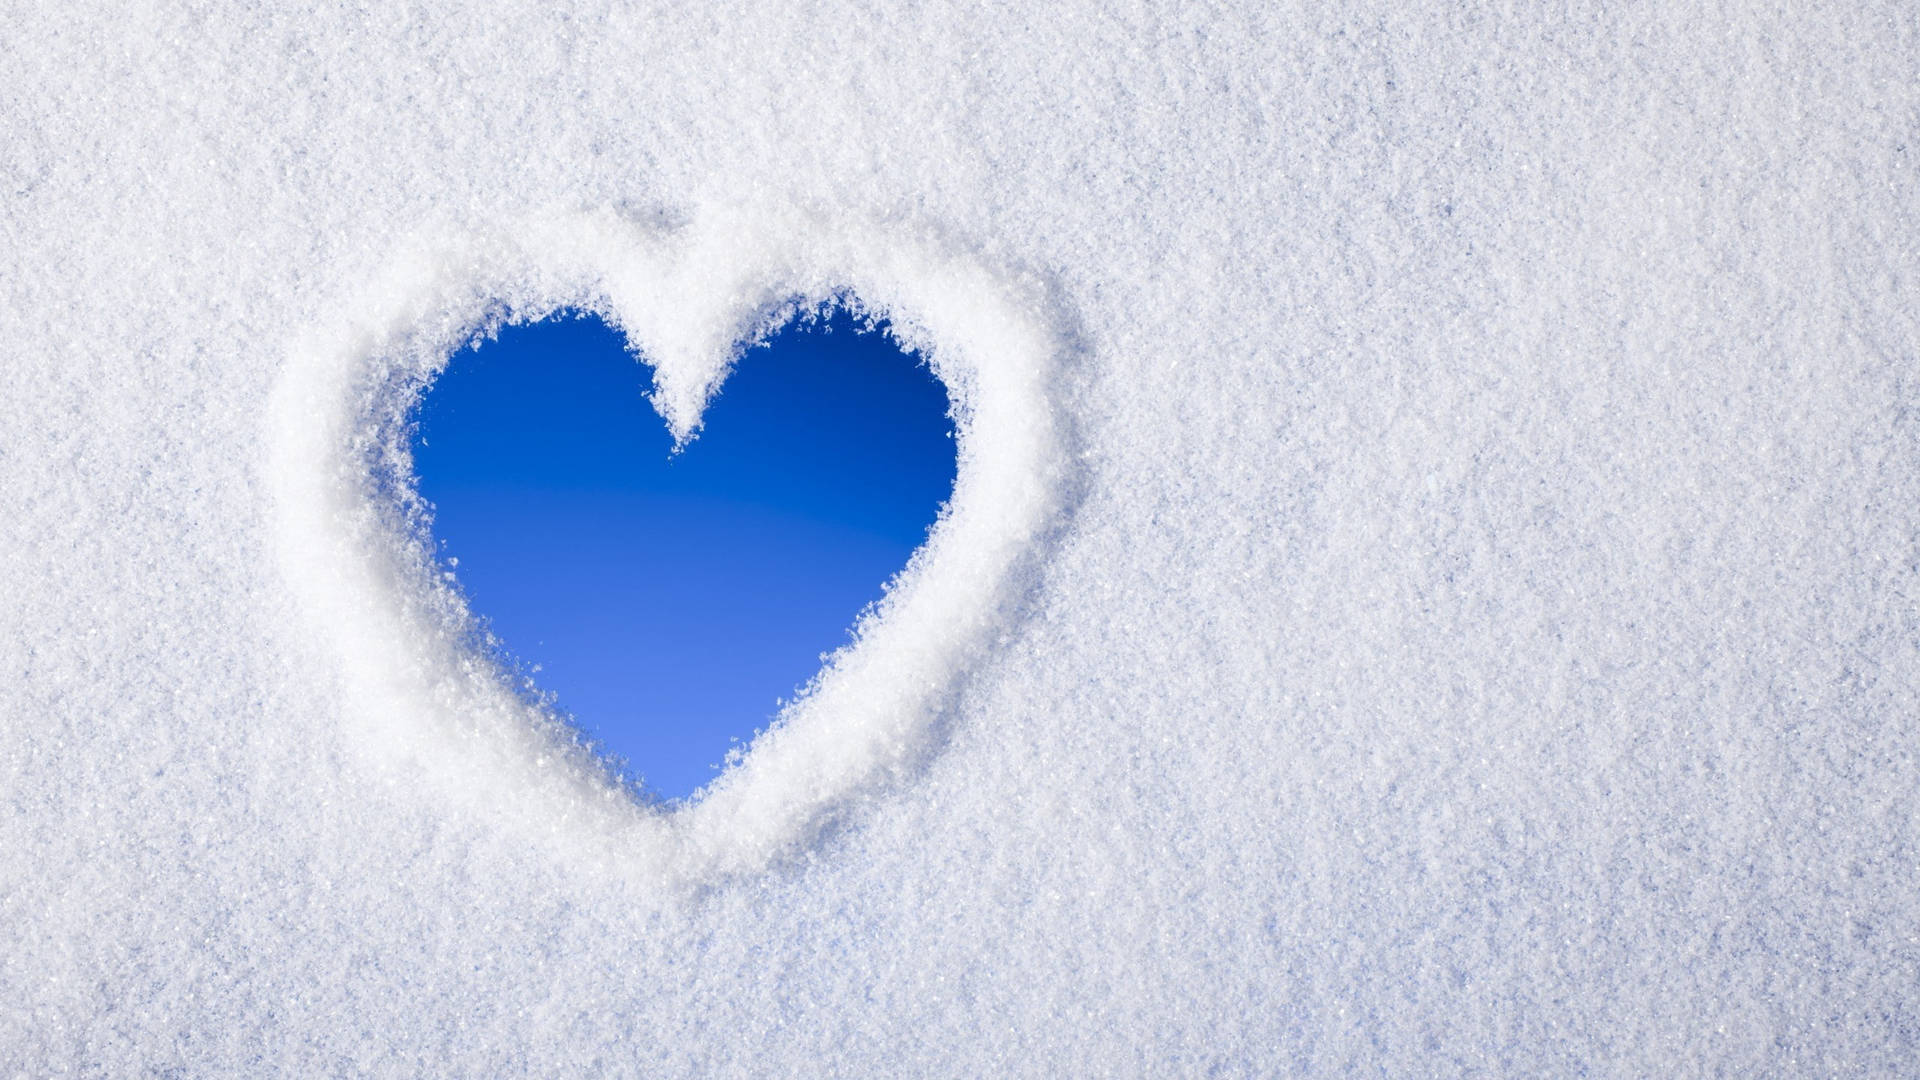 Cold Snow Heart Illustration Background